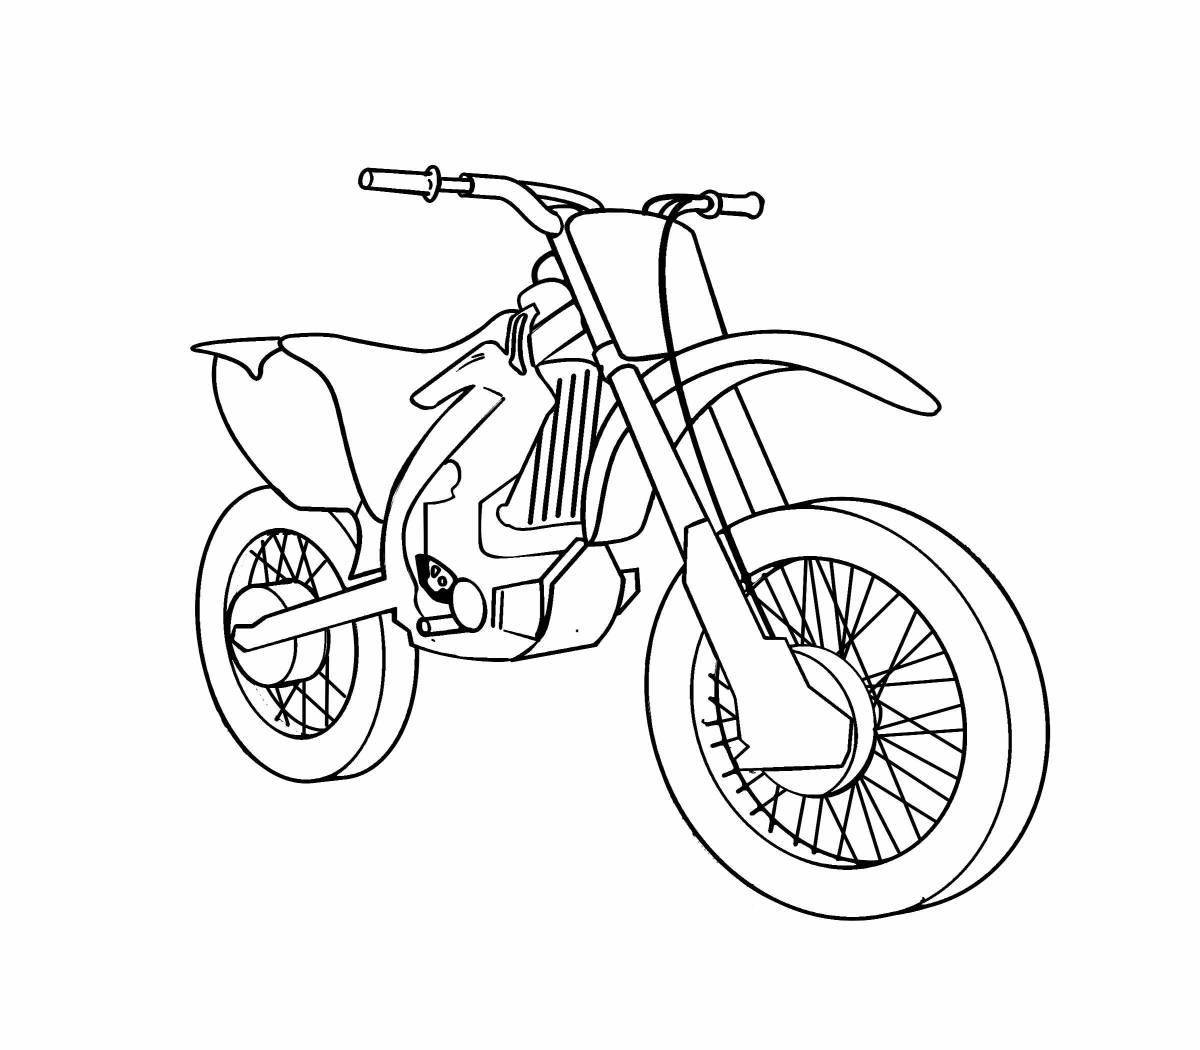 Adorable motorcycle coloring book for 3-4 year olds